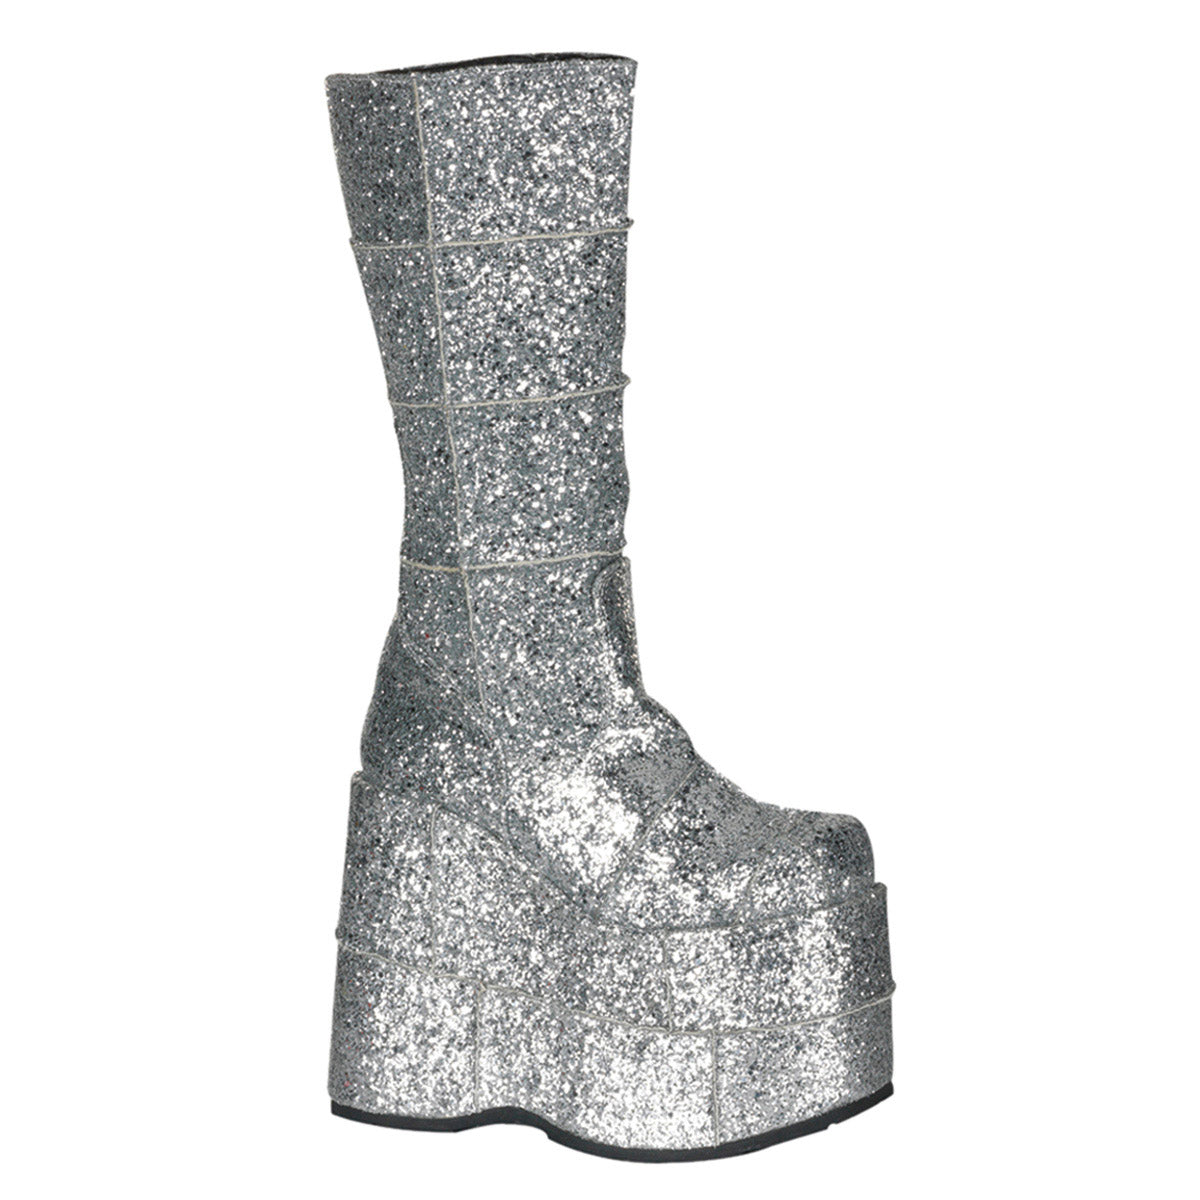 Sexy Goth Punk Patched Glitter Mid Calf Extreme Platform Boots Shoes Pleaser Demonia STACK/301G